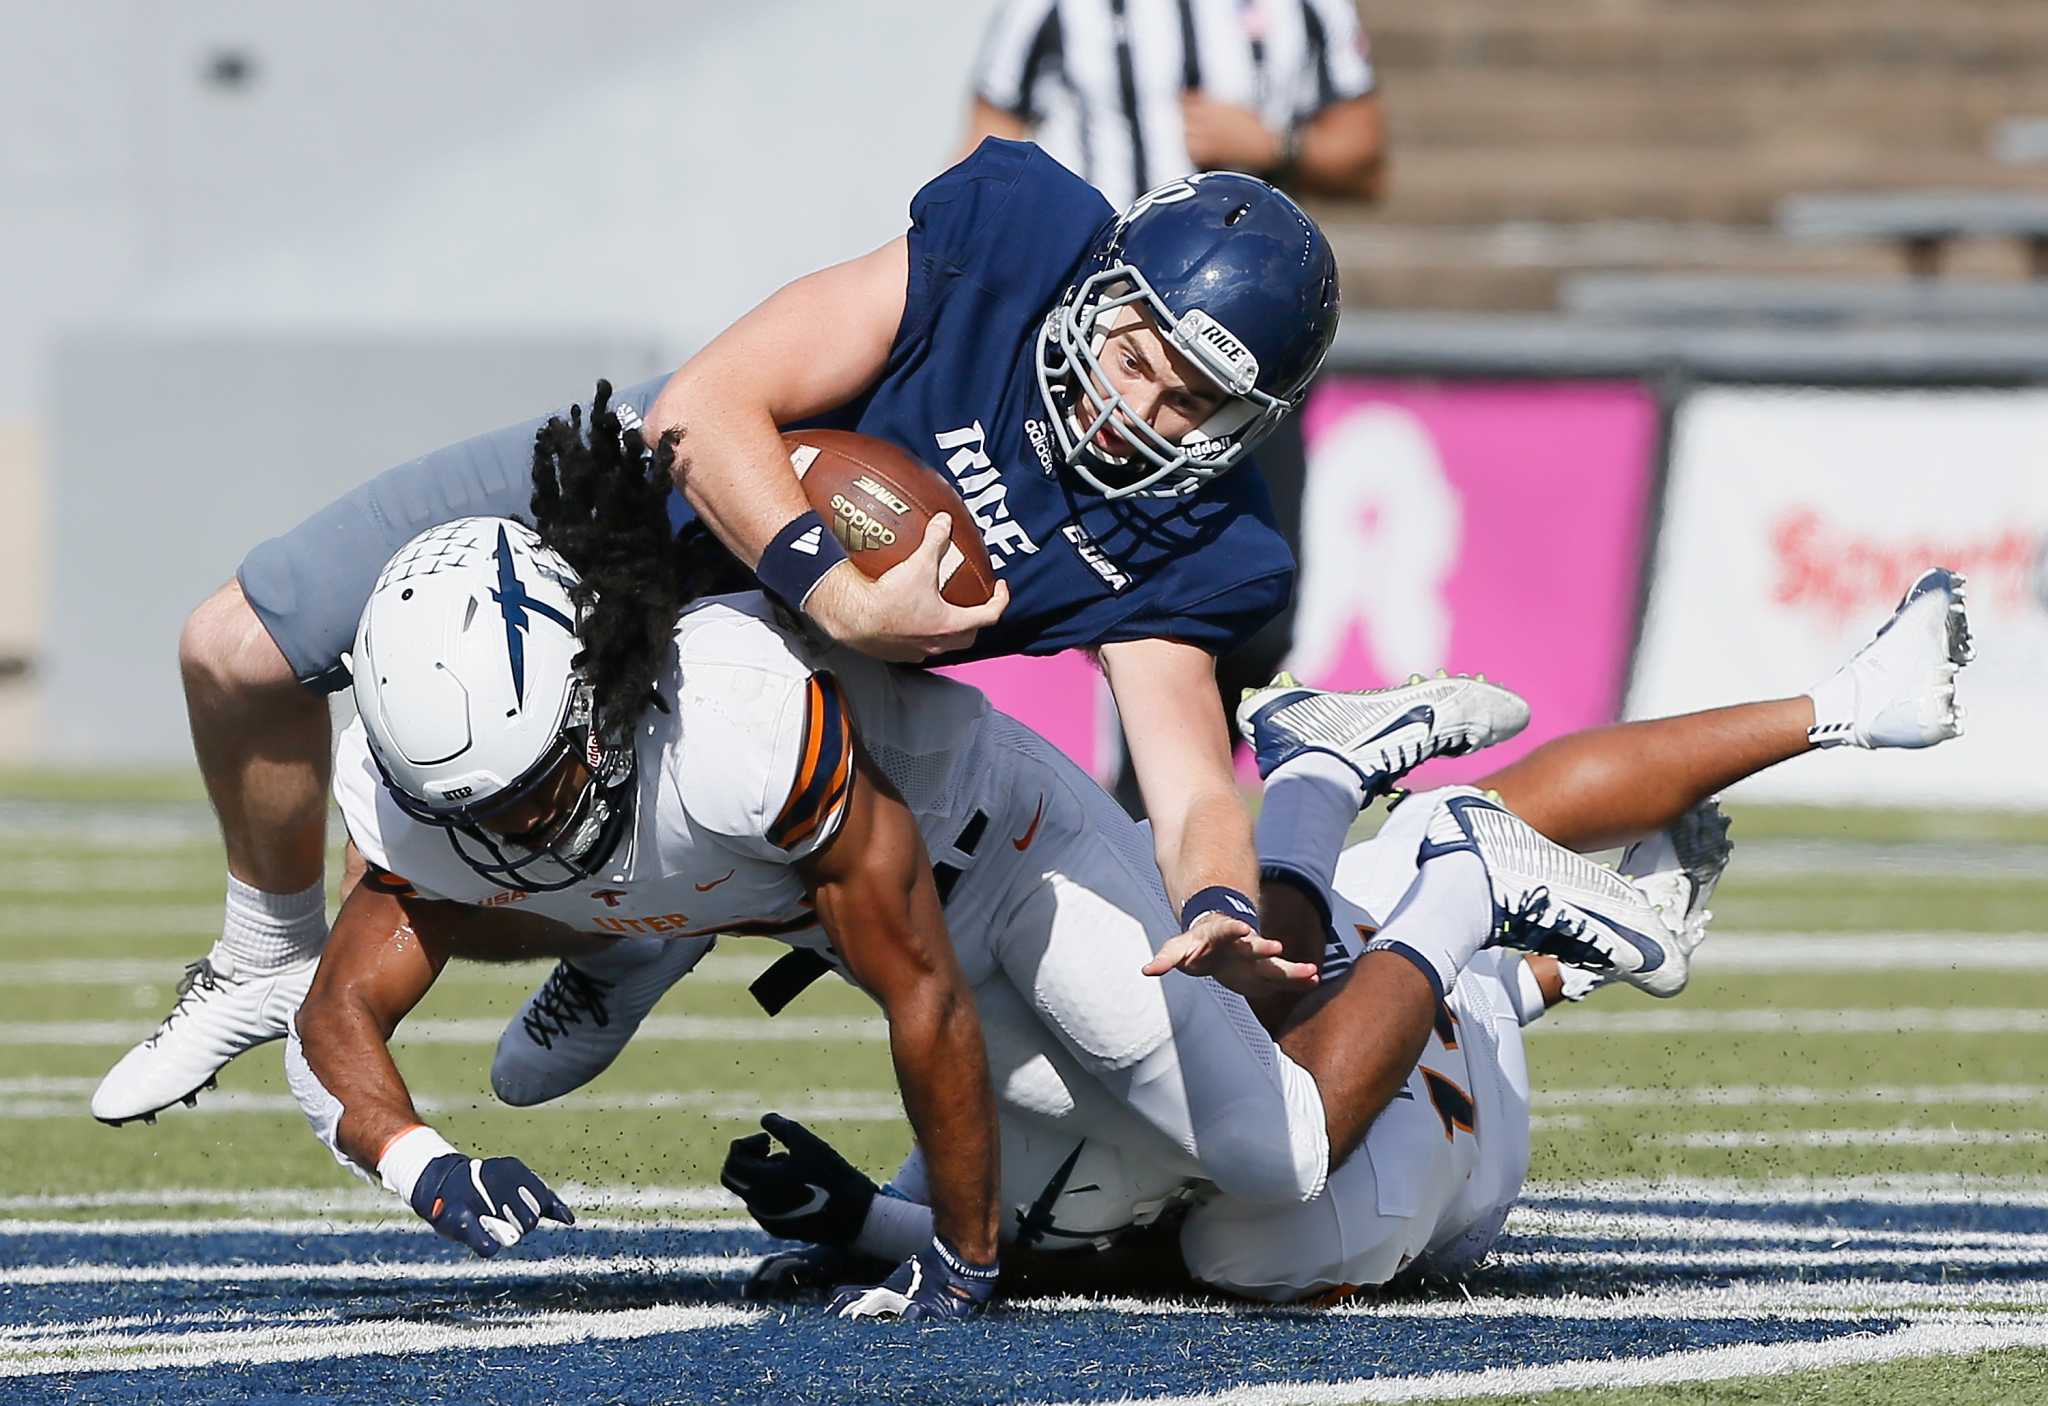 College football preview: Old Dominion at Rice - Houston Chronicle2048 x 1406